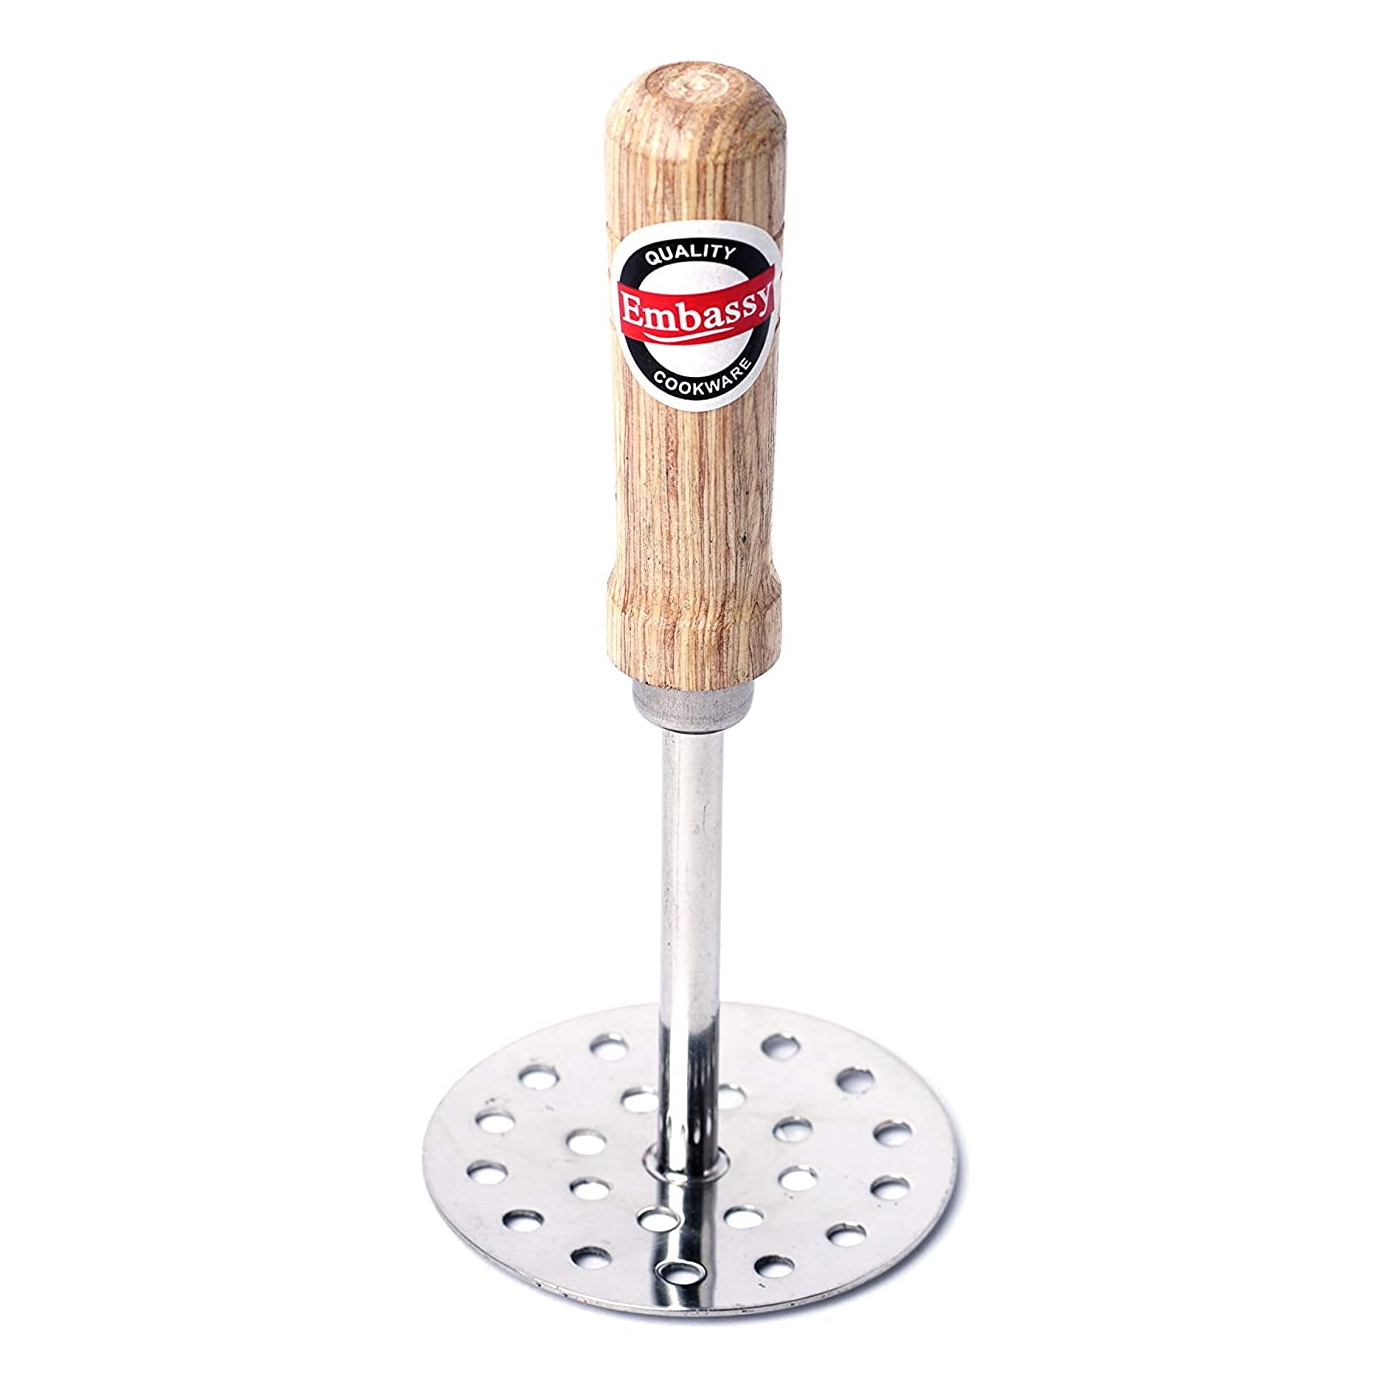 Embassy Stainless Steel Potato/ Masher with Wooden Handle Size 05- 13 cms